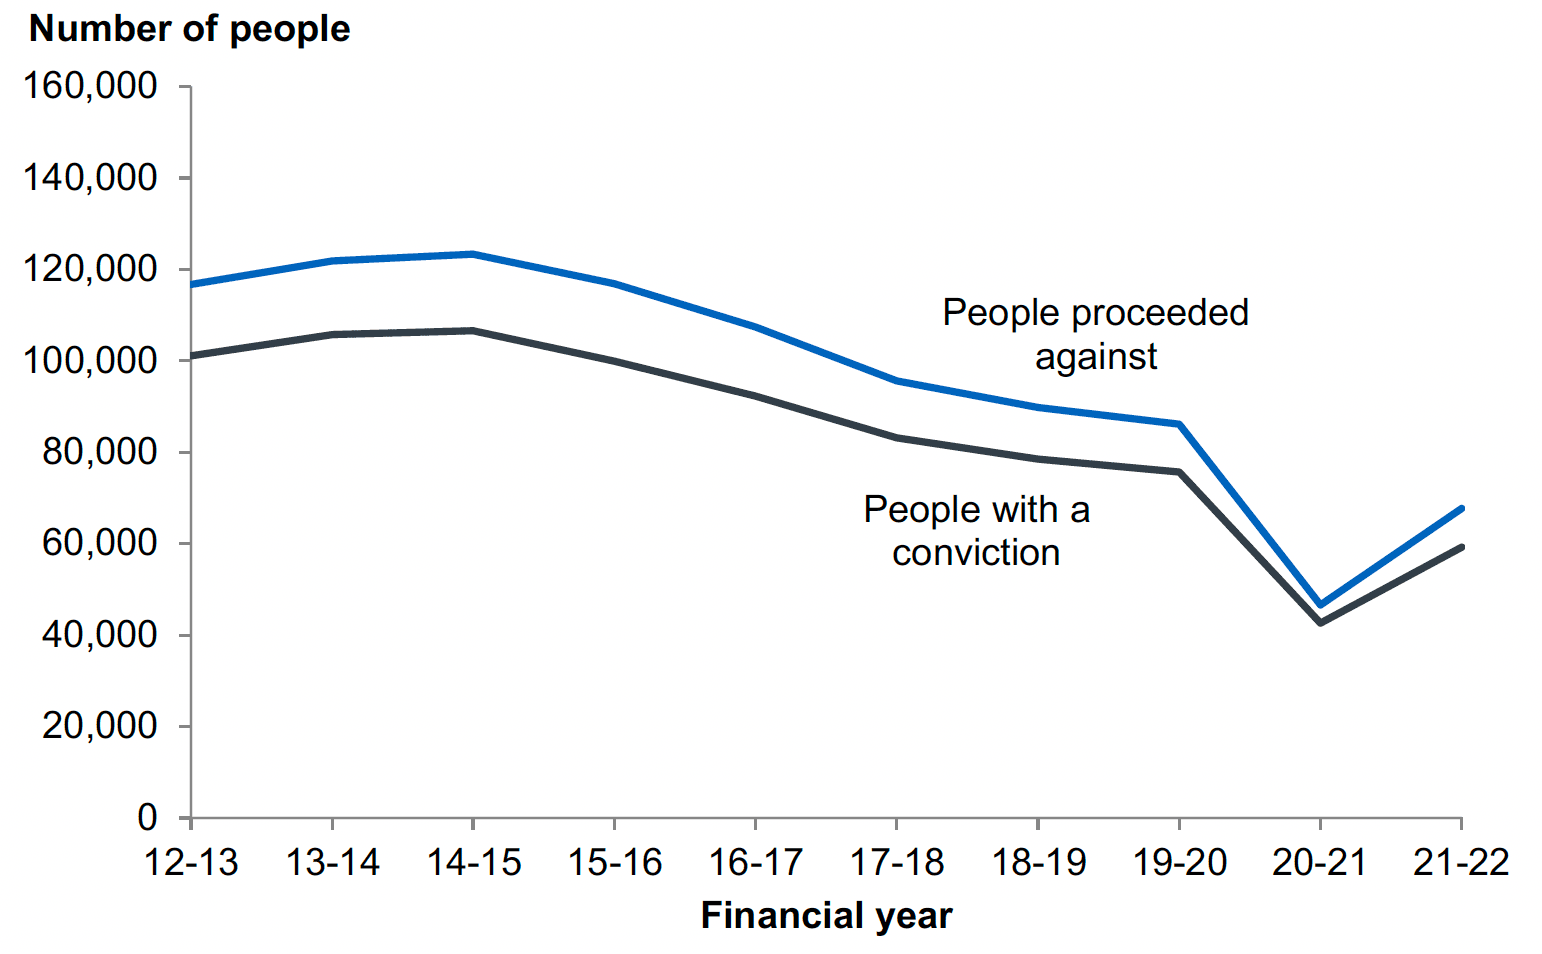 A line chart with two lines, one showing people proceeded against and the other showing people conviction. Both lines show a general downwards trend over 10 years, with both lines starting above 100,000 in 2012-13. 2021-22 shows a rise from the pandemic-affected data of 2020-21, but still lower than pre-pandemic levels.